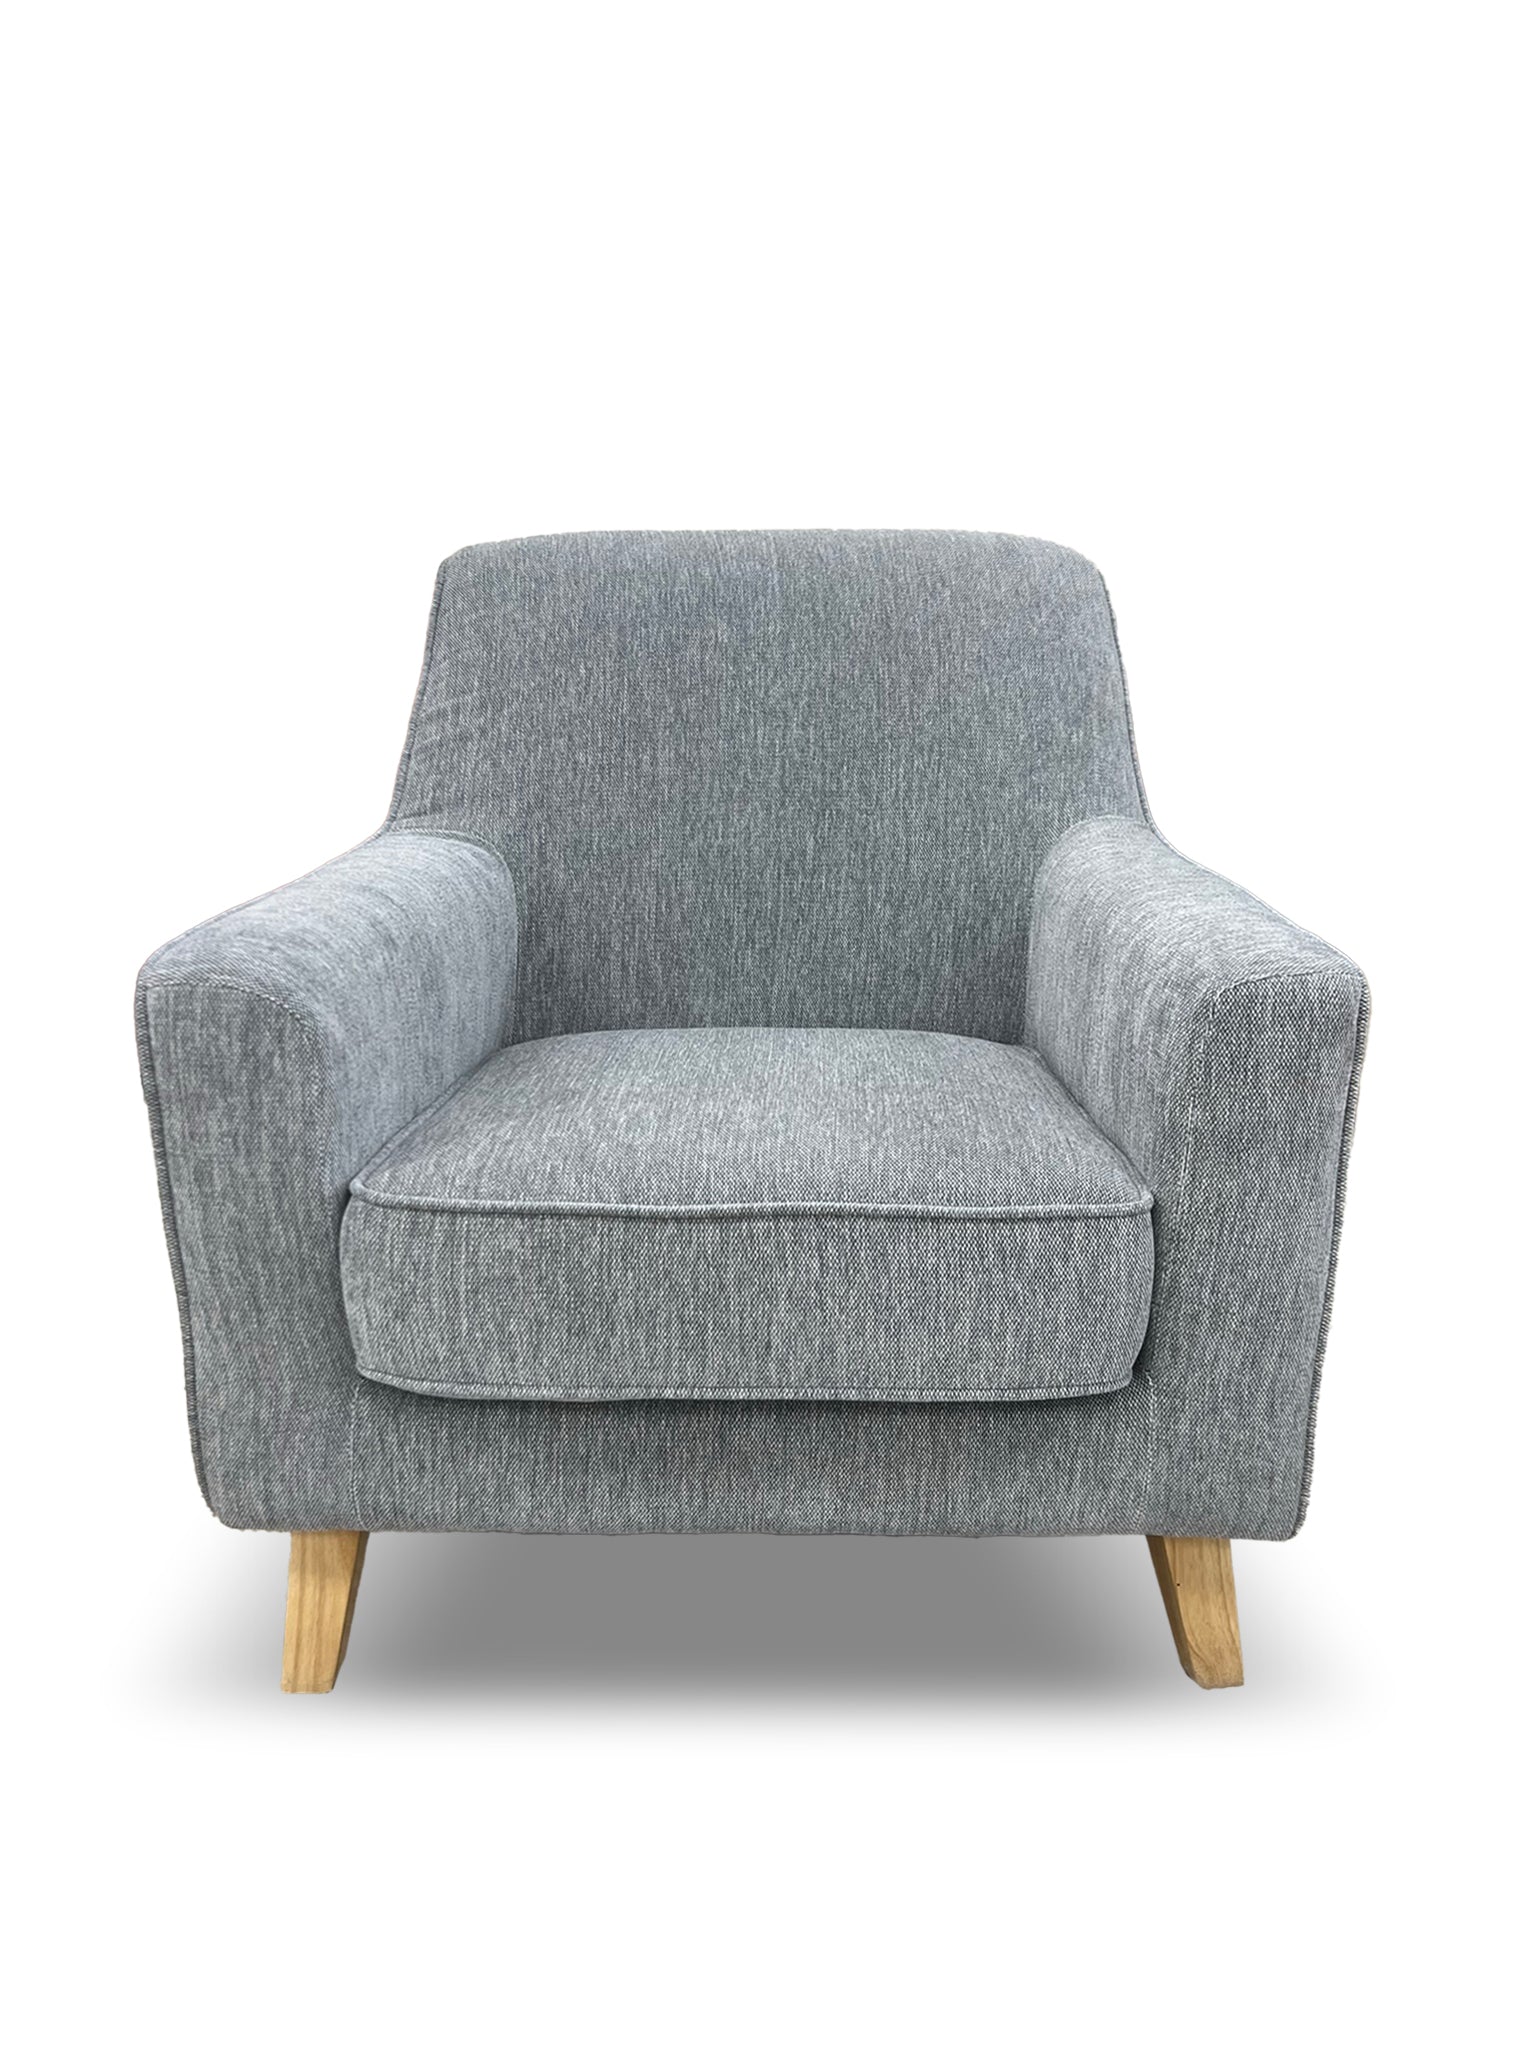 Malaga Accent Chair In Light Grey